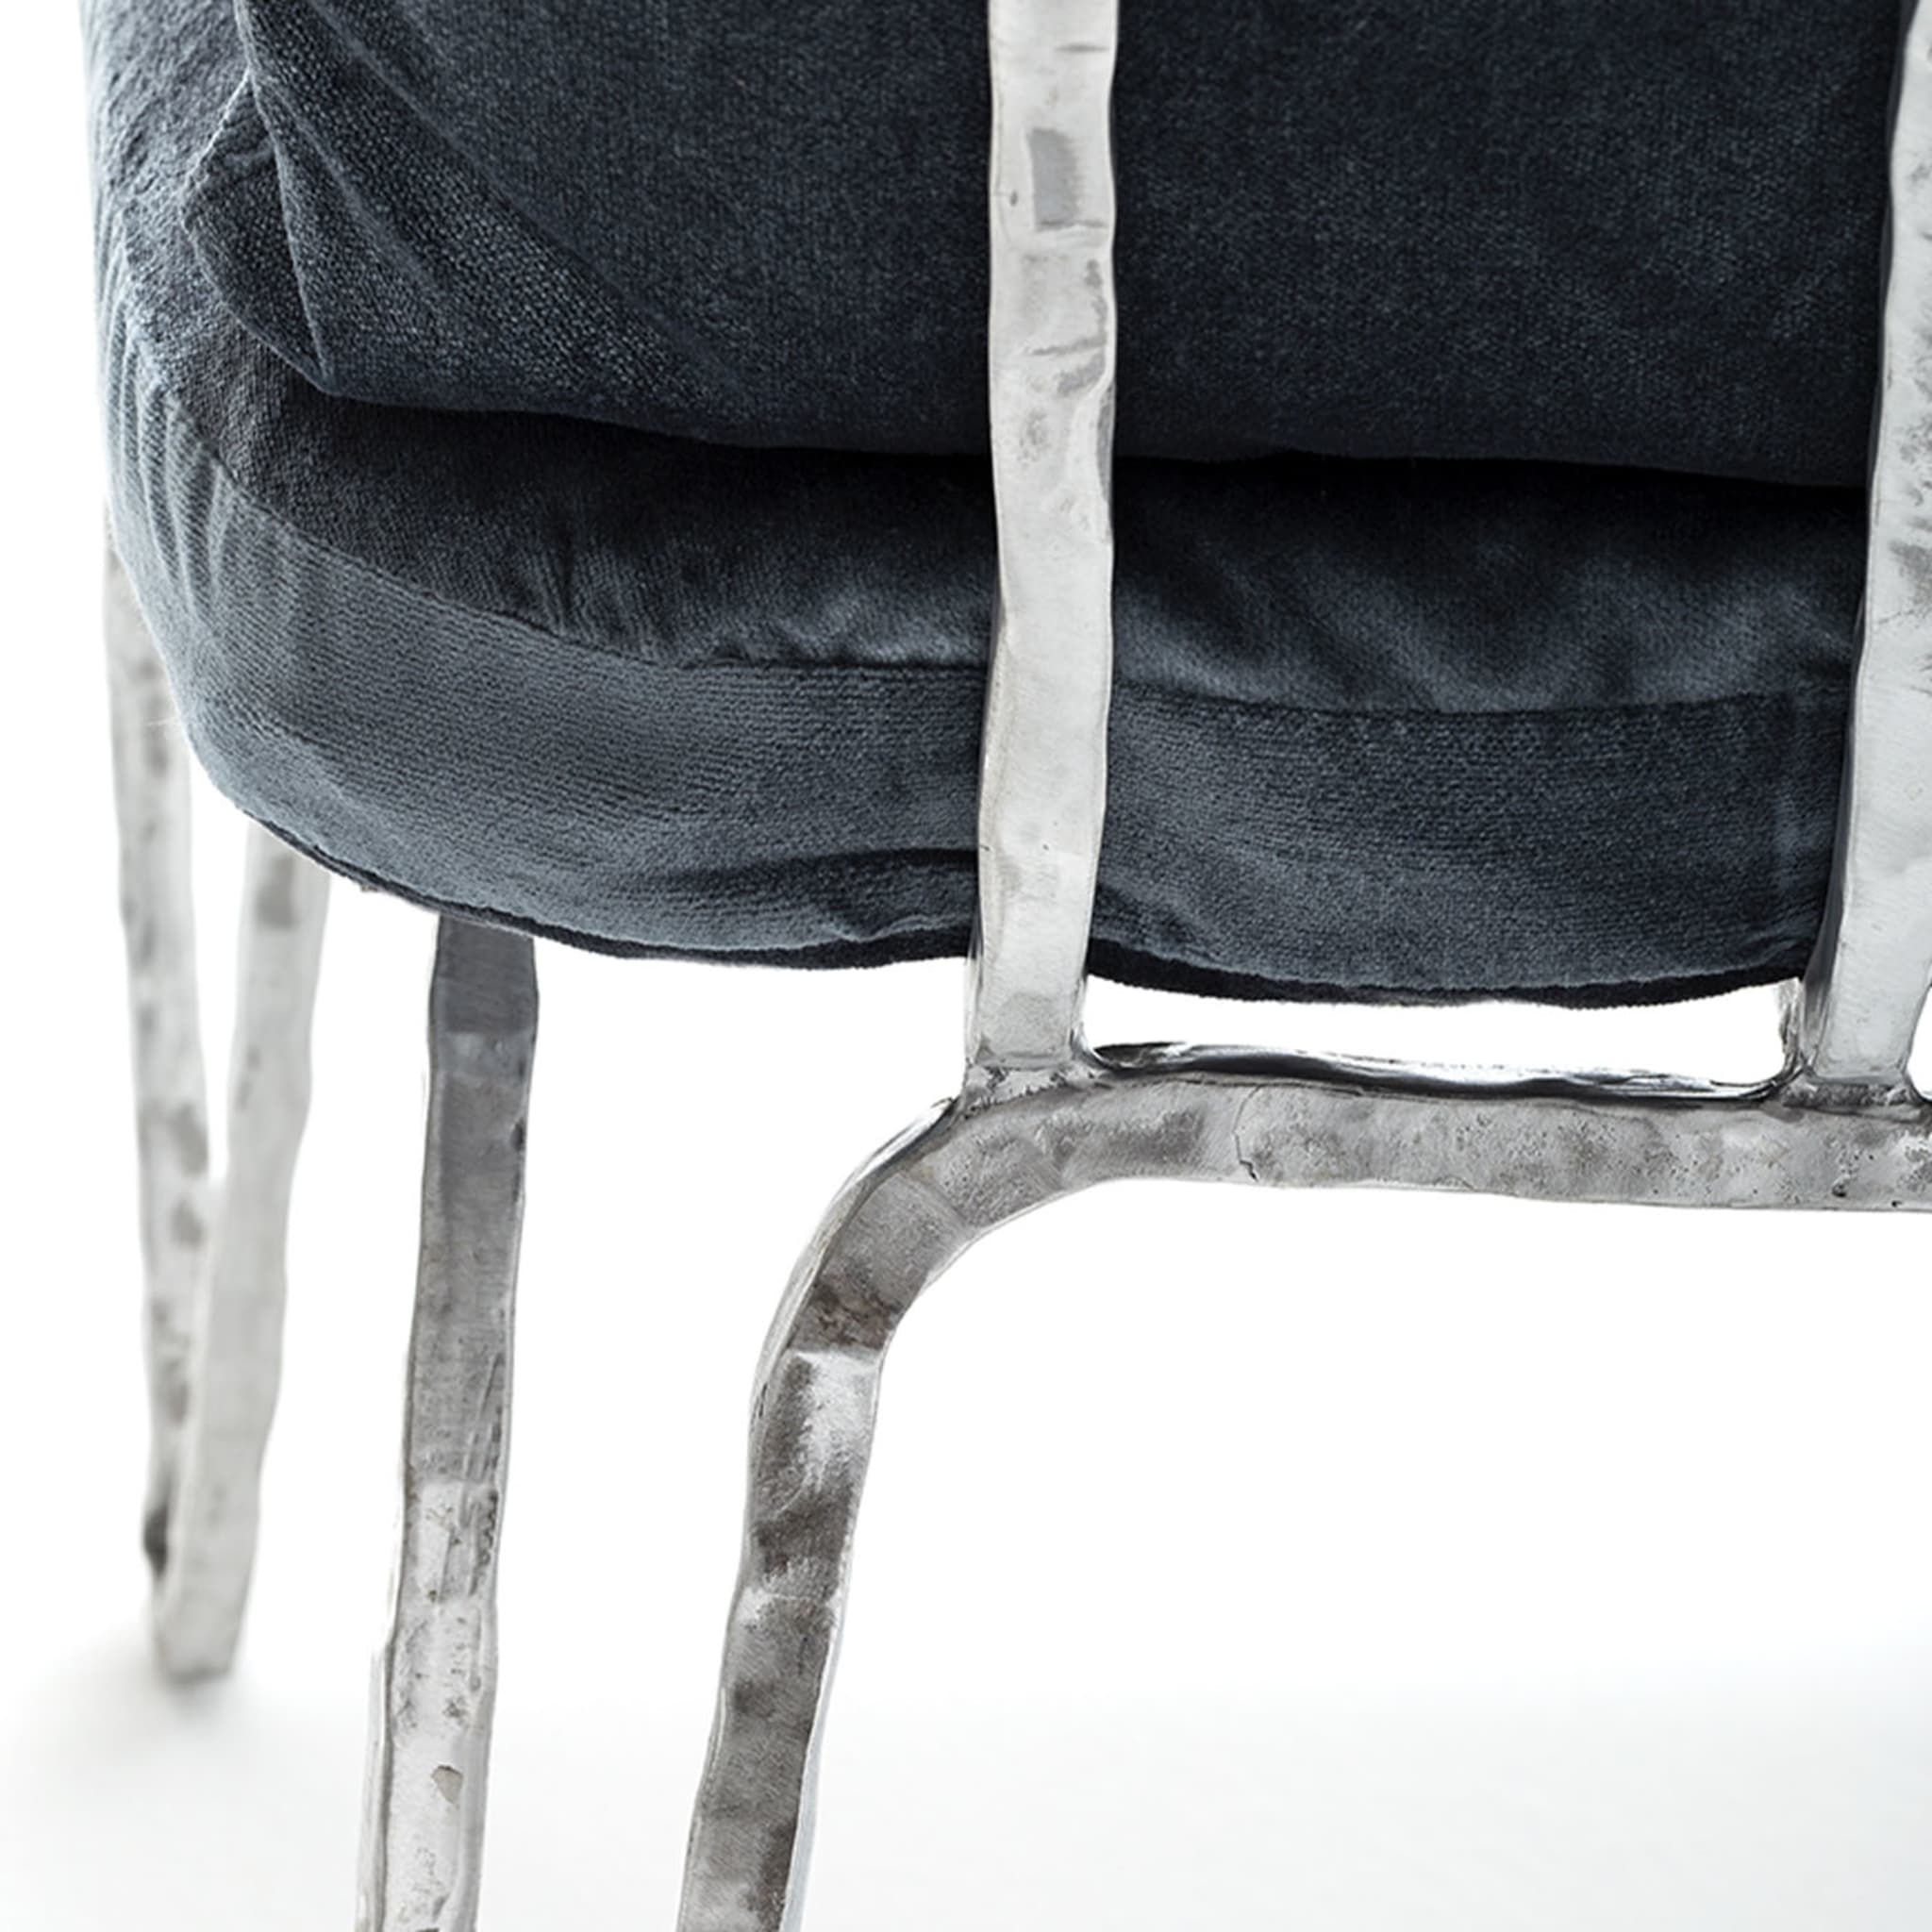 Moonlight Silver and Blue Low Chair - Alternative view 2